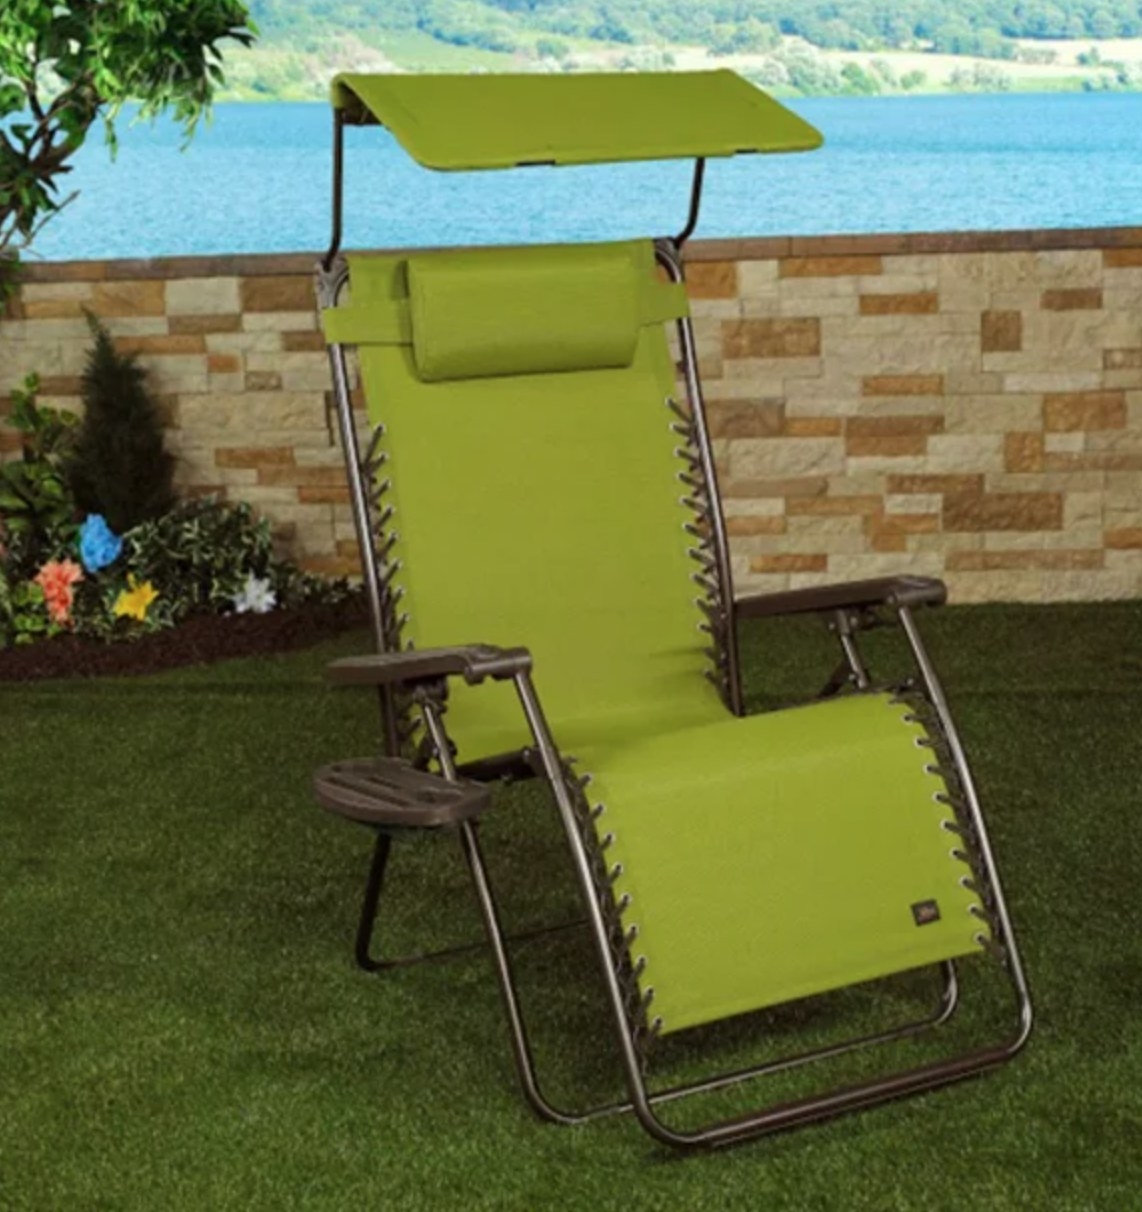 the green outdoor chair with a shade in a decorated backyard space